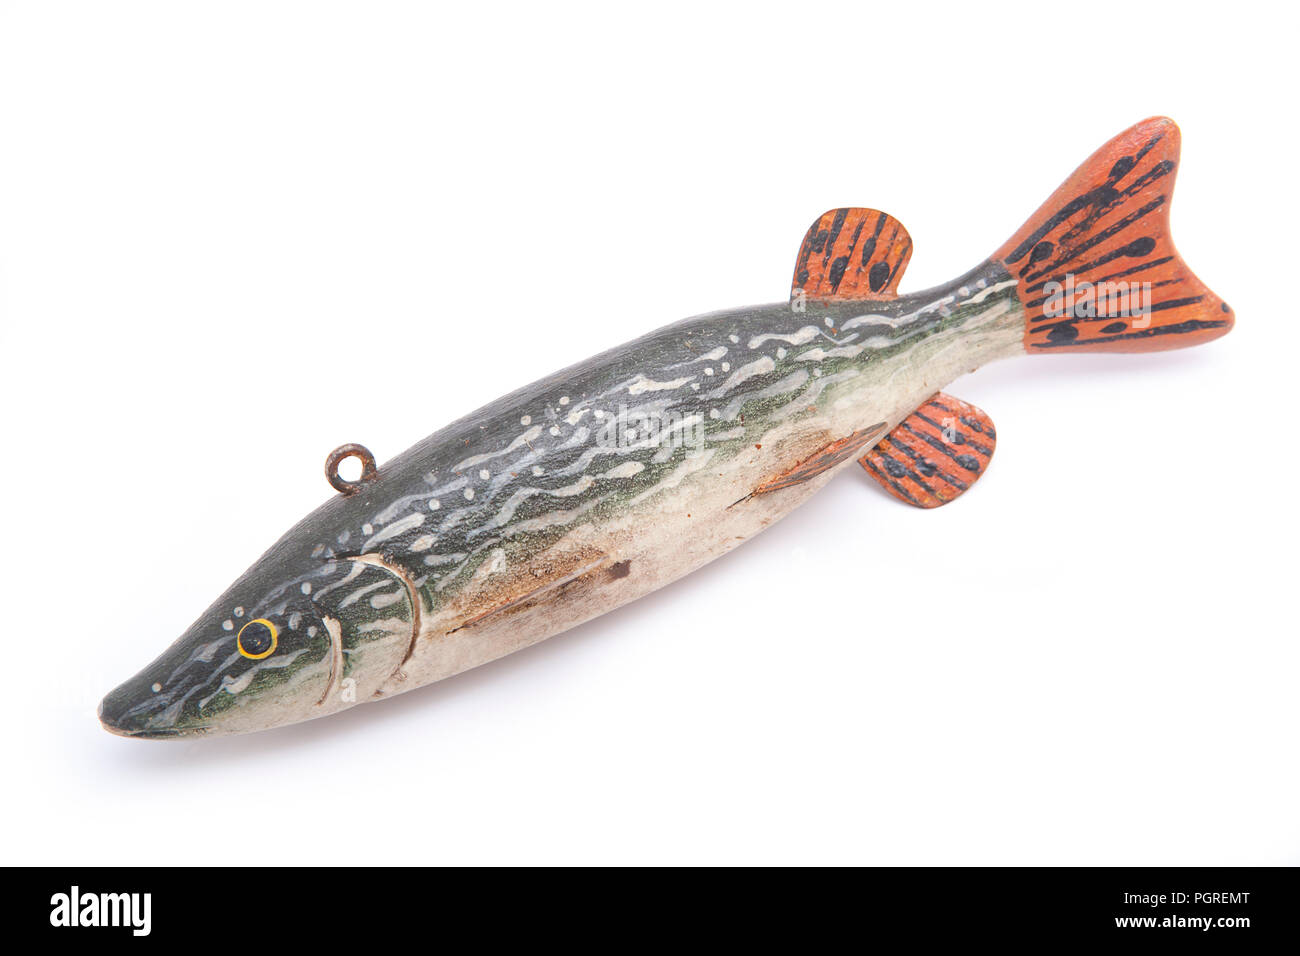 An old wooden decoy fish in the form of a pike. These lures were often used